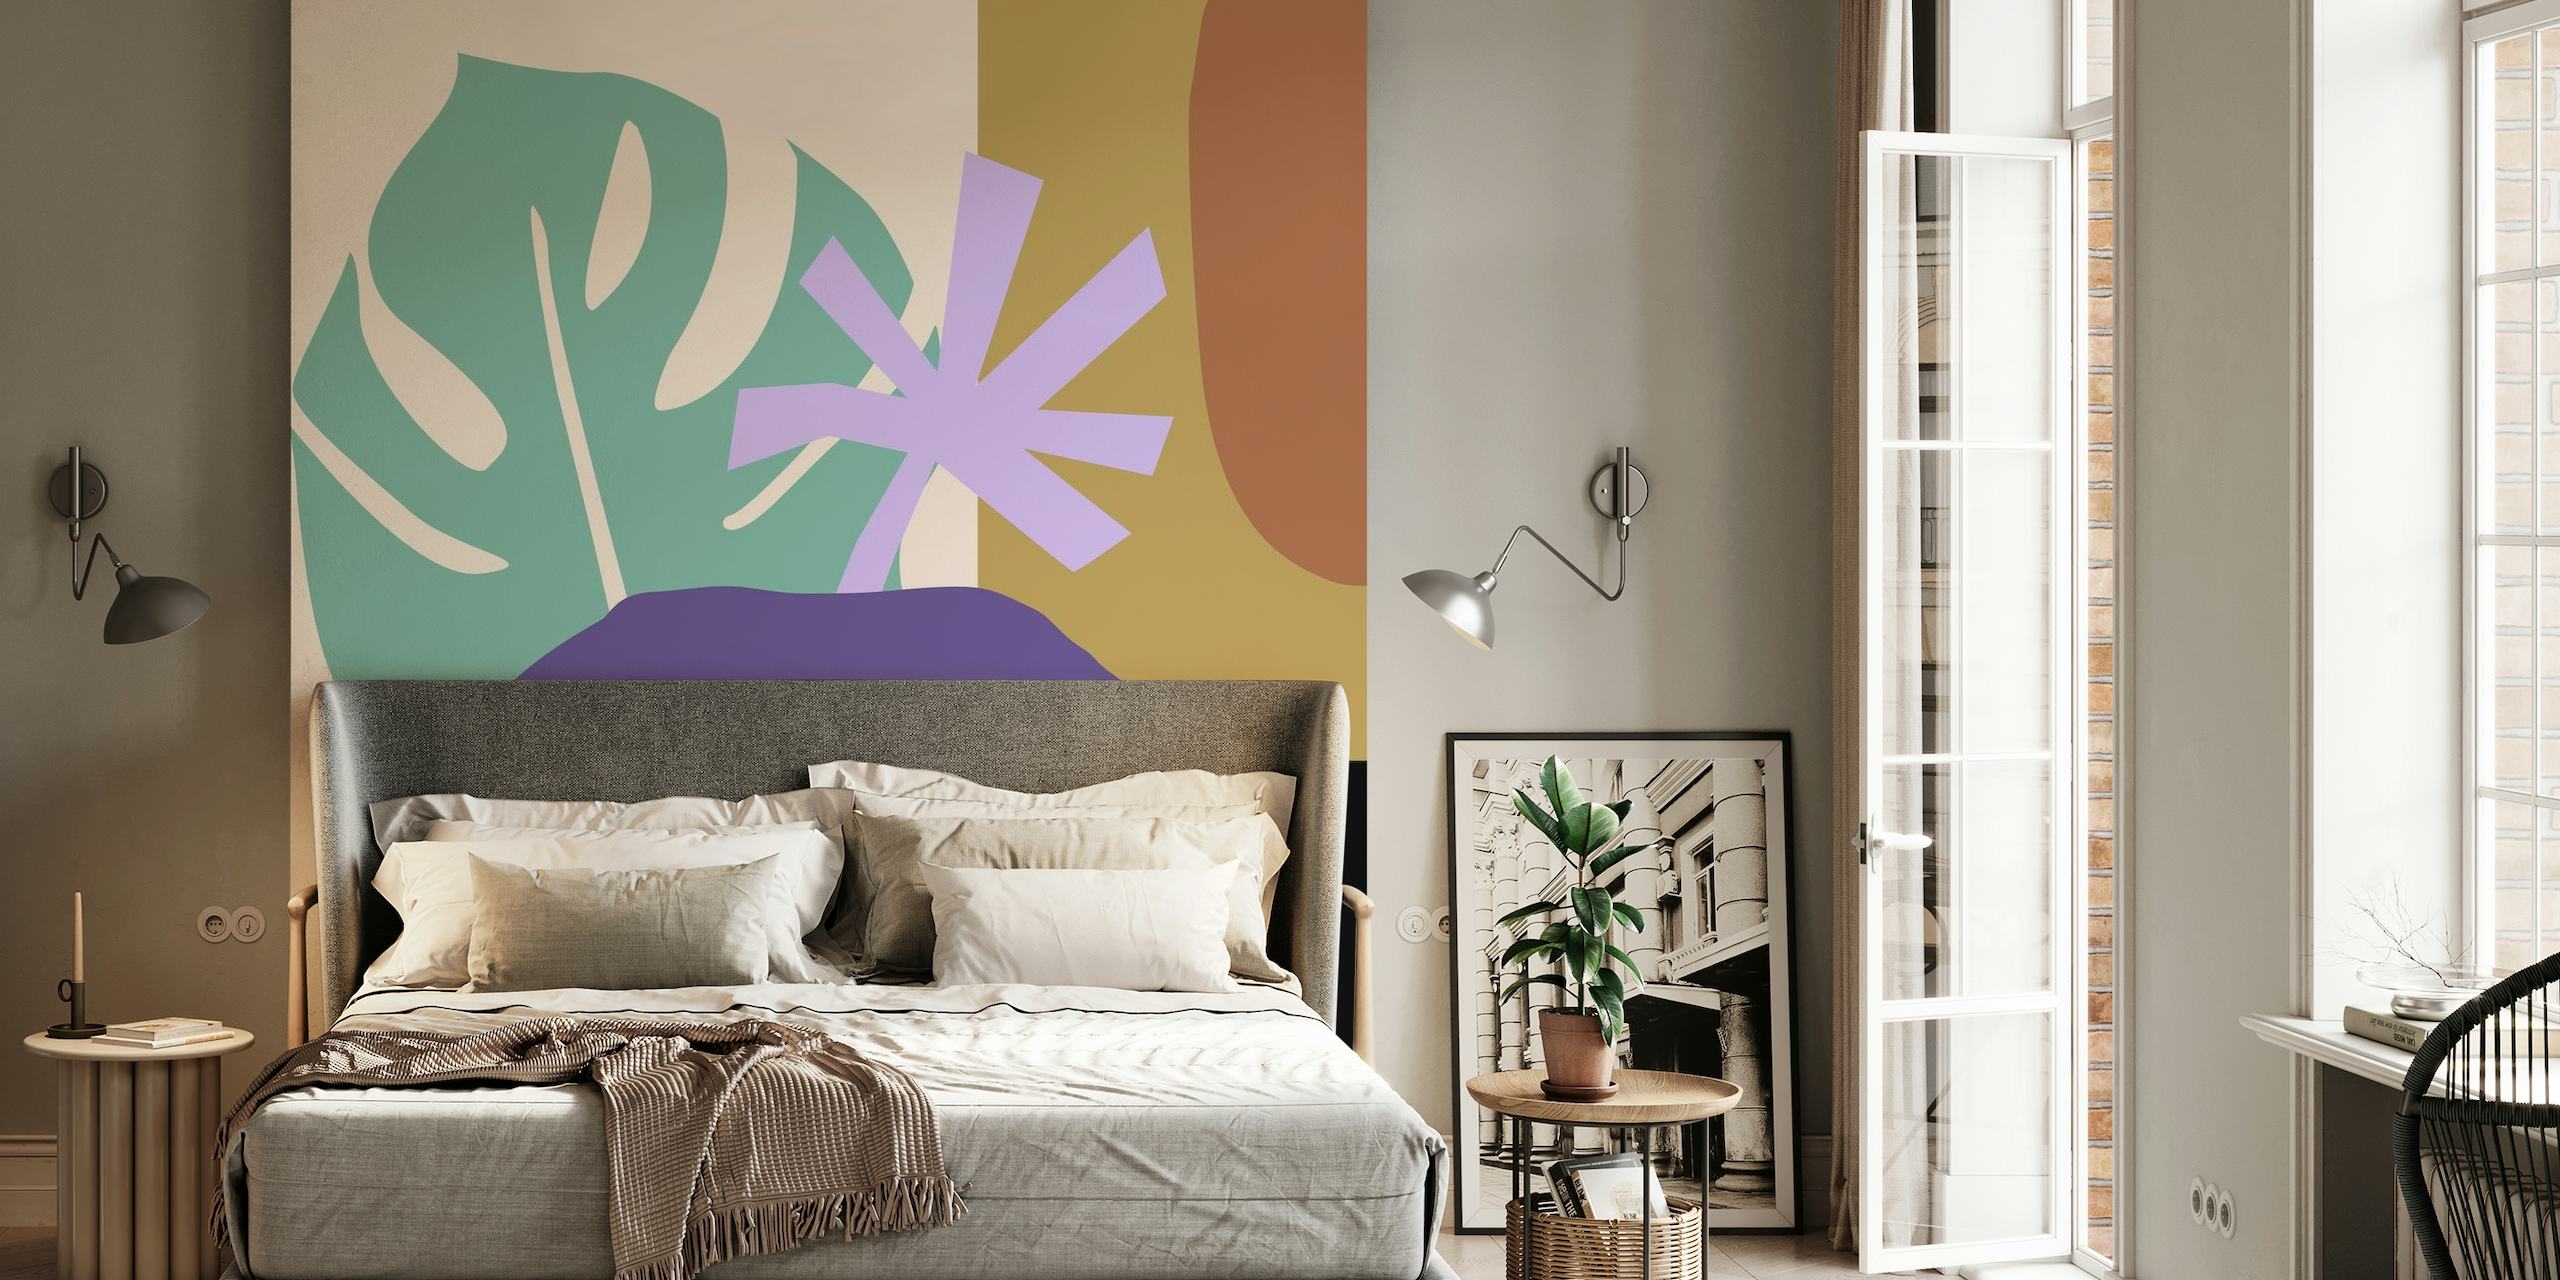 Ultra Violet Monstera wall mural with stylized leaves and abstract design